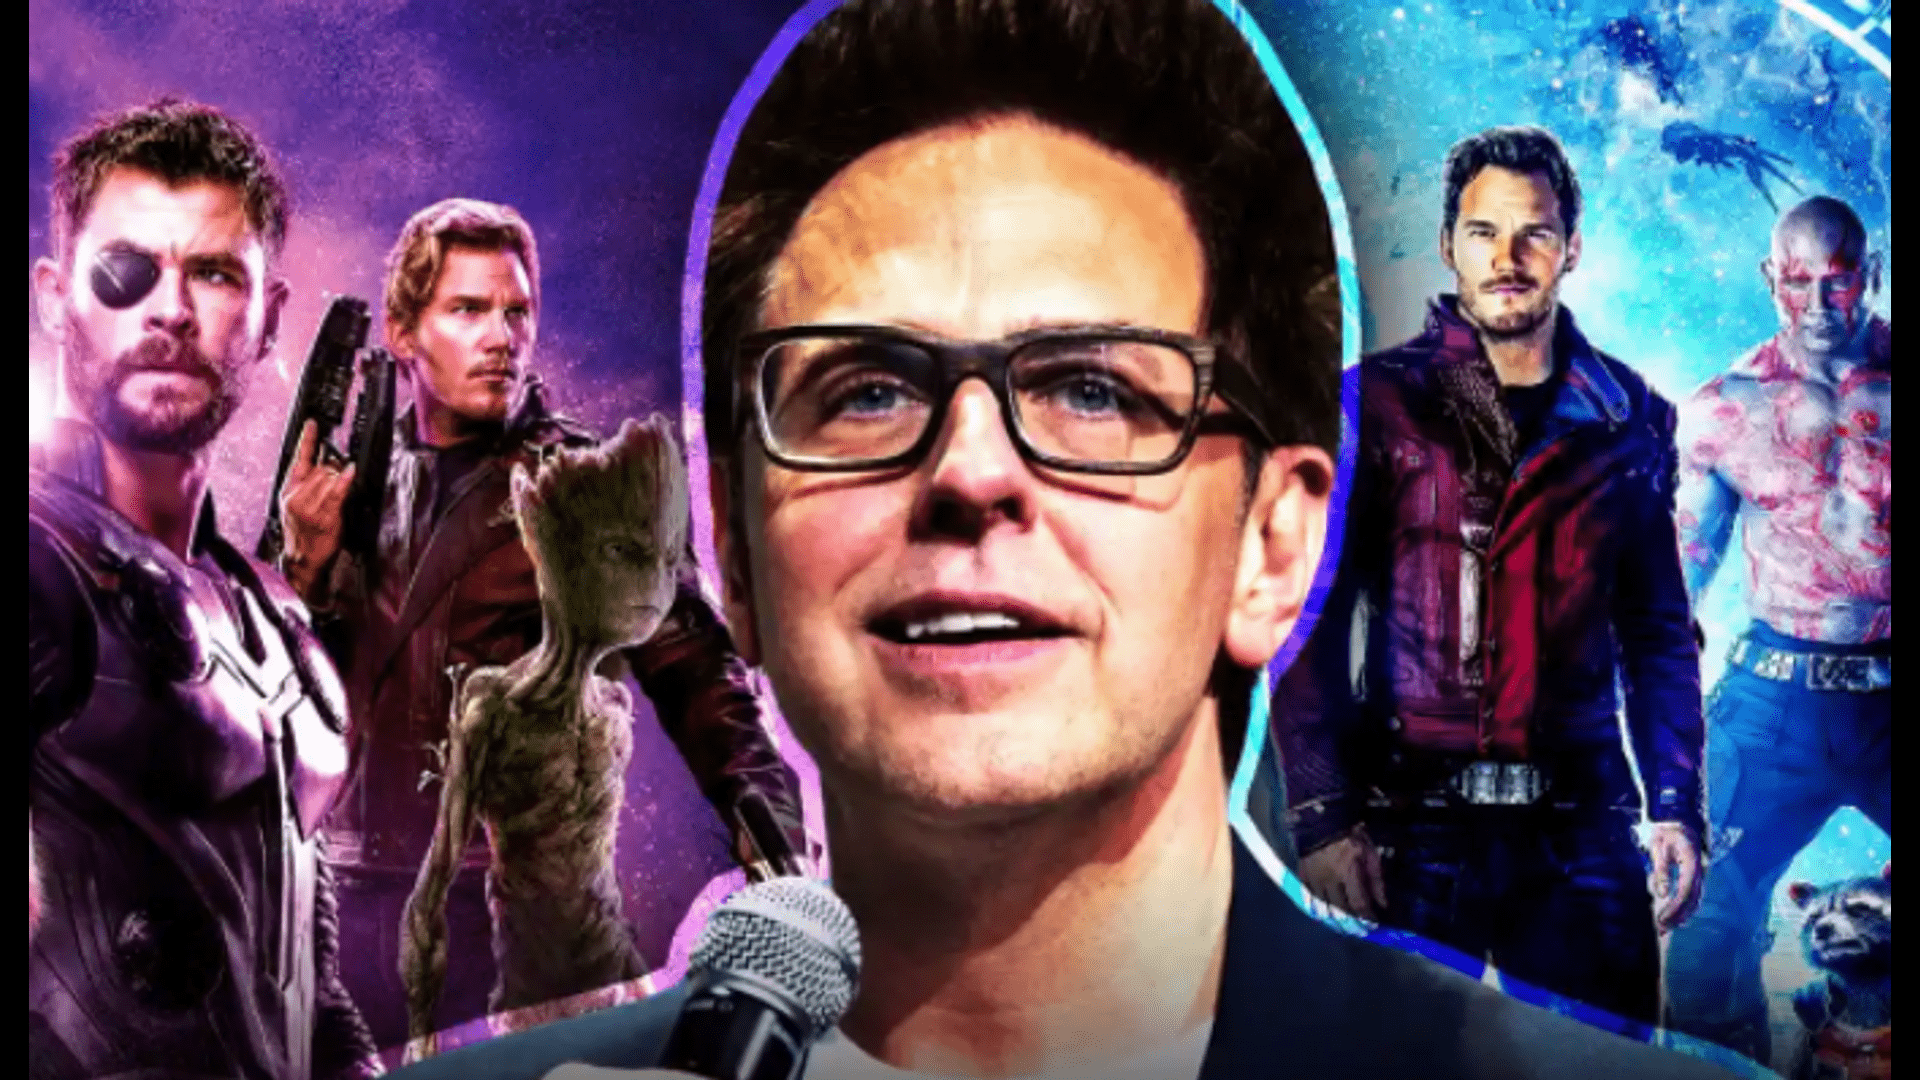 James Gunn commented on his future with Marvel and DC.